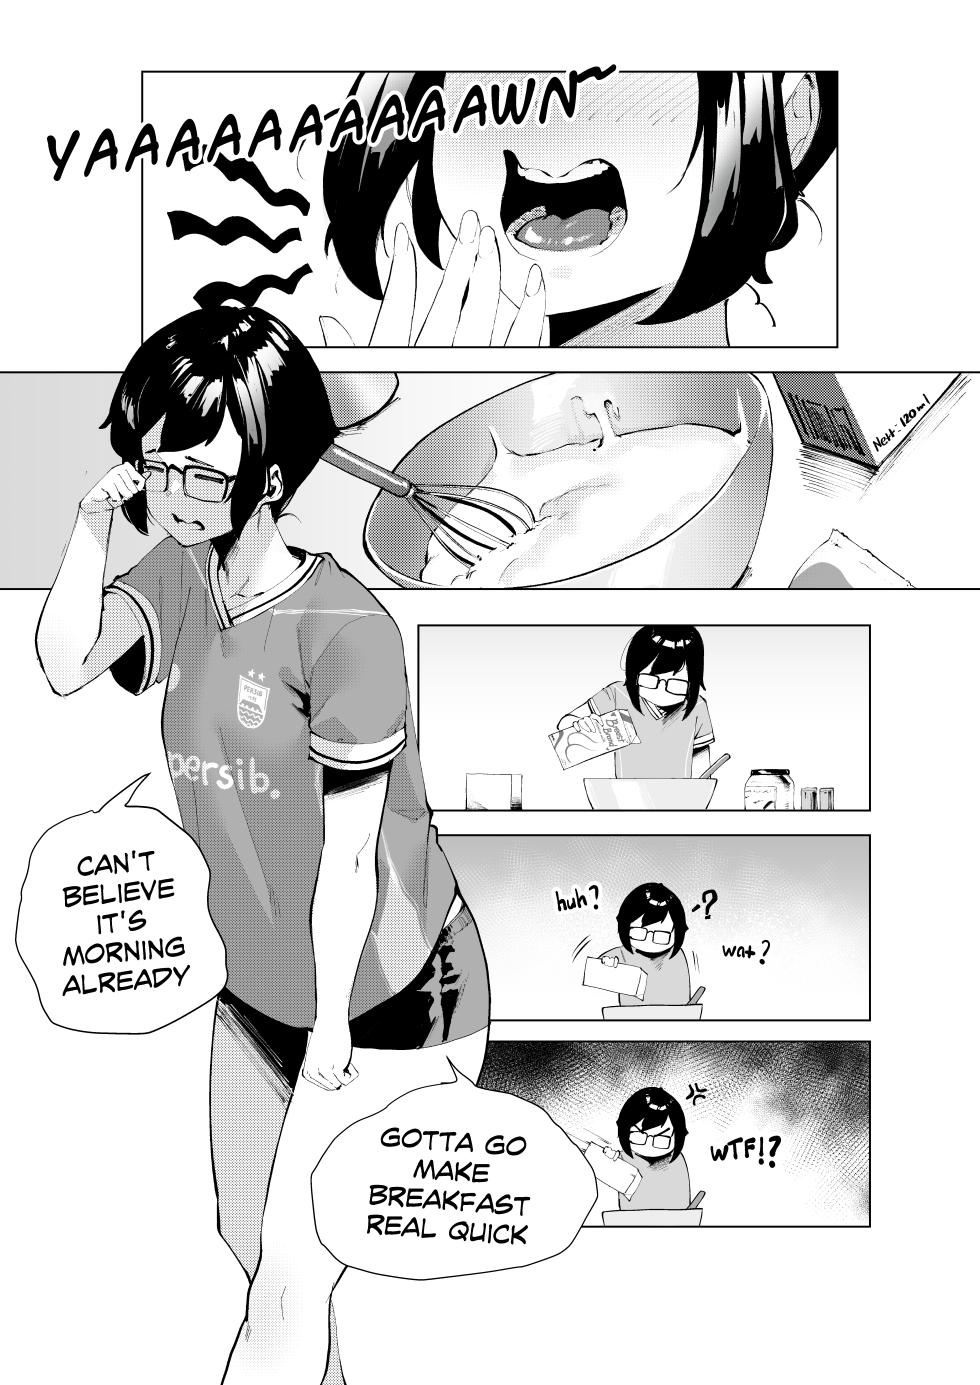 [Lulu-Chan92] Would You Like Some Choccy Milk For Your Breakfast? - Page 4